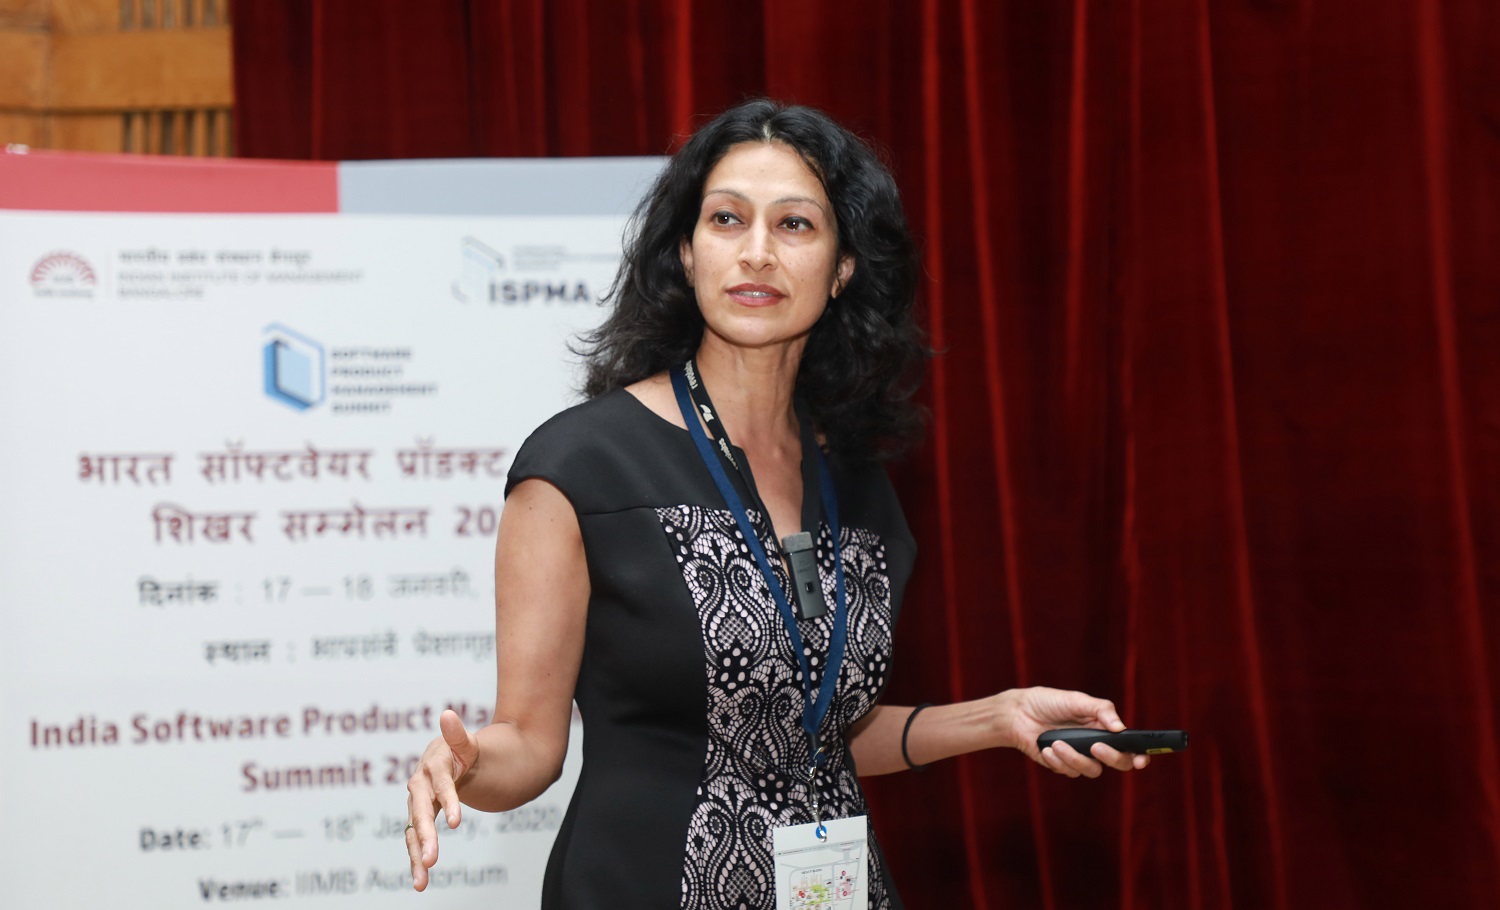 “Diversity creates an enrichment of products and services and enhances our lives. We should embrace it as a pathway to create innovation,” remarks Payal Arora, Chair in Technology, Values, and Global Media Cultures, Erasmus University, Rotterdam, speaking on 'Tech Design for the Next Billion', at the India Software Product Management Summit 2020 (ISPMS 2020), hosted by IIMB on January 17–18, 2020.